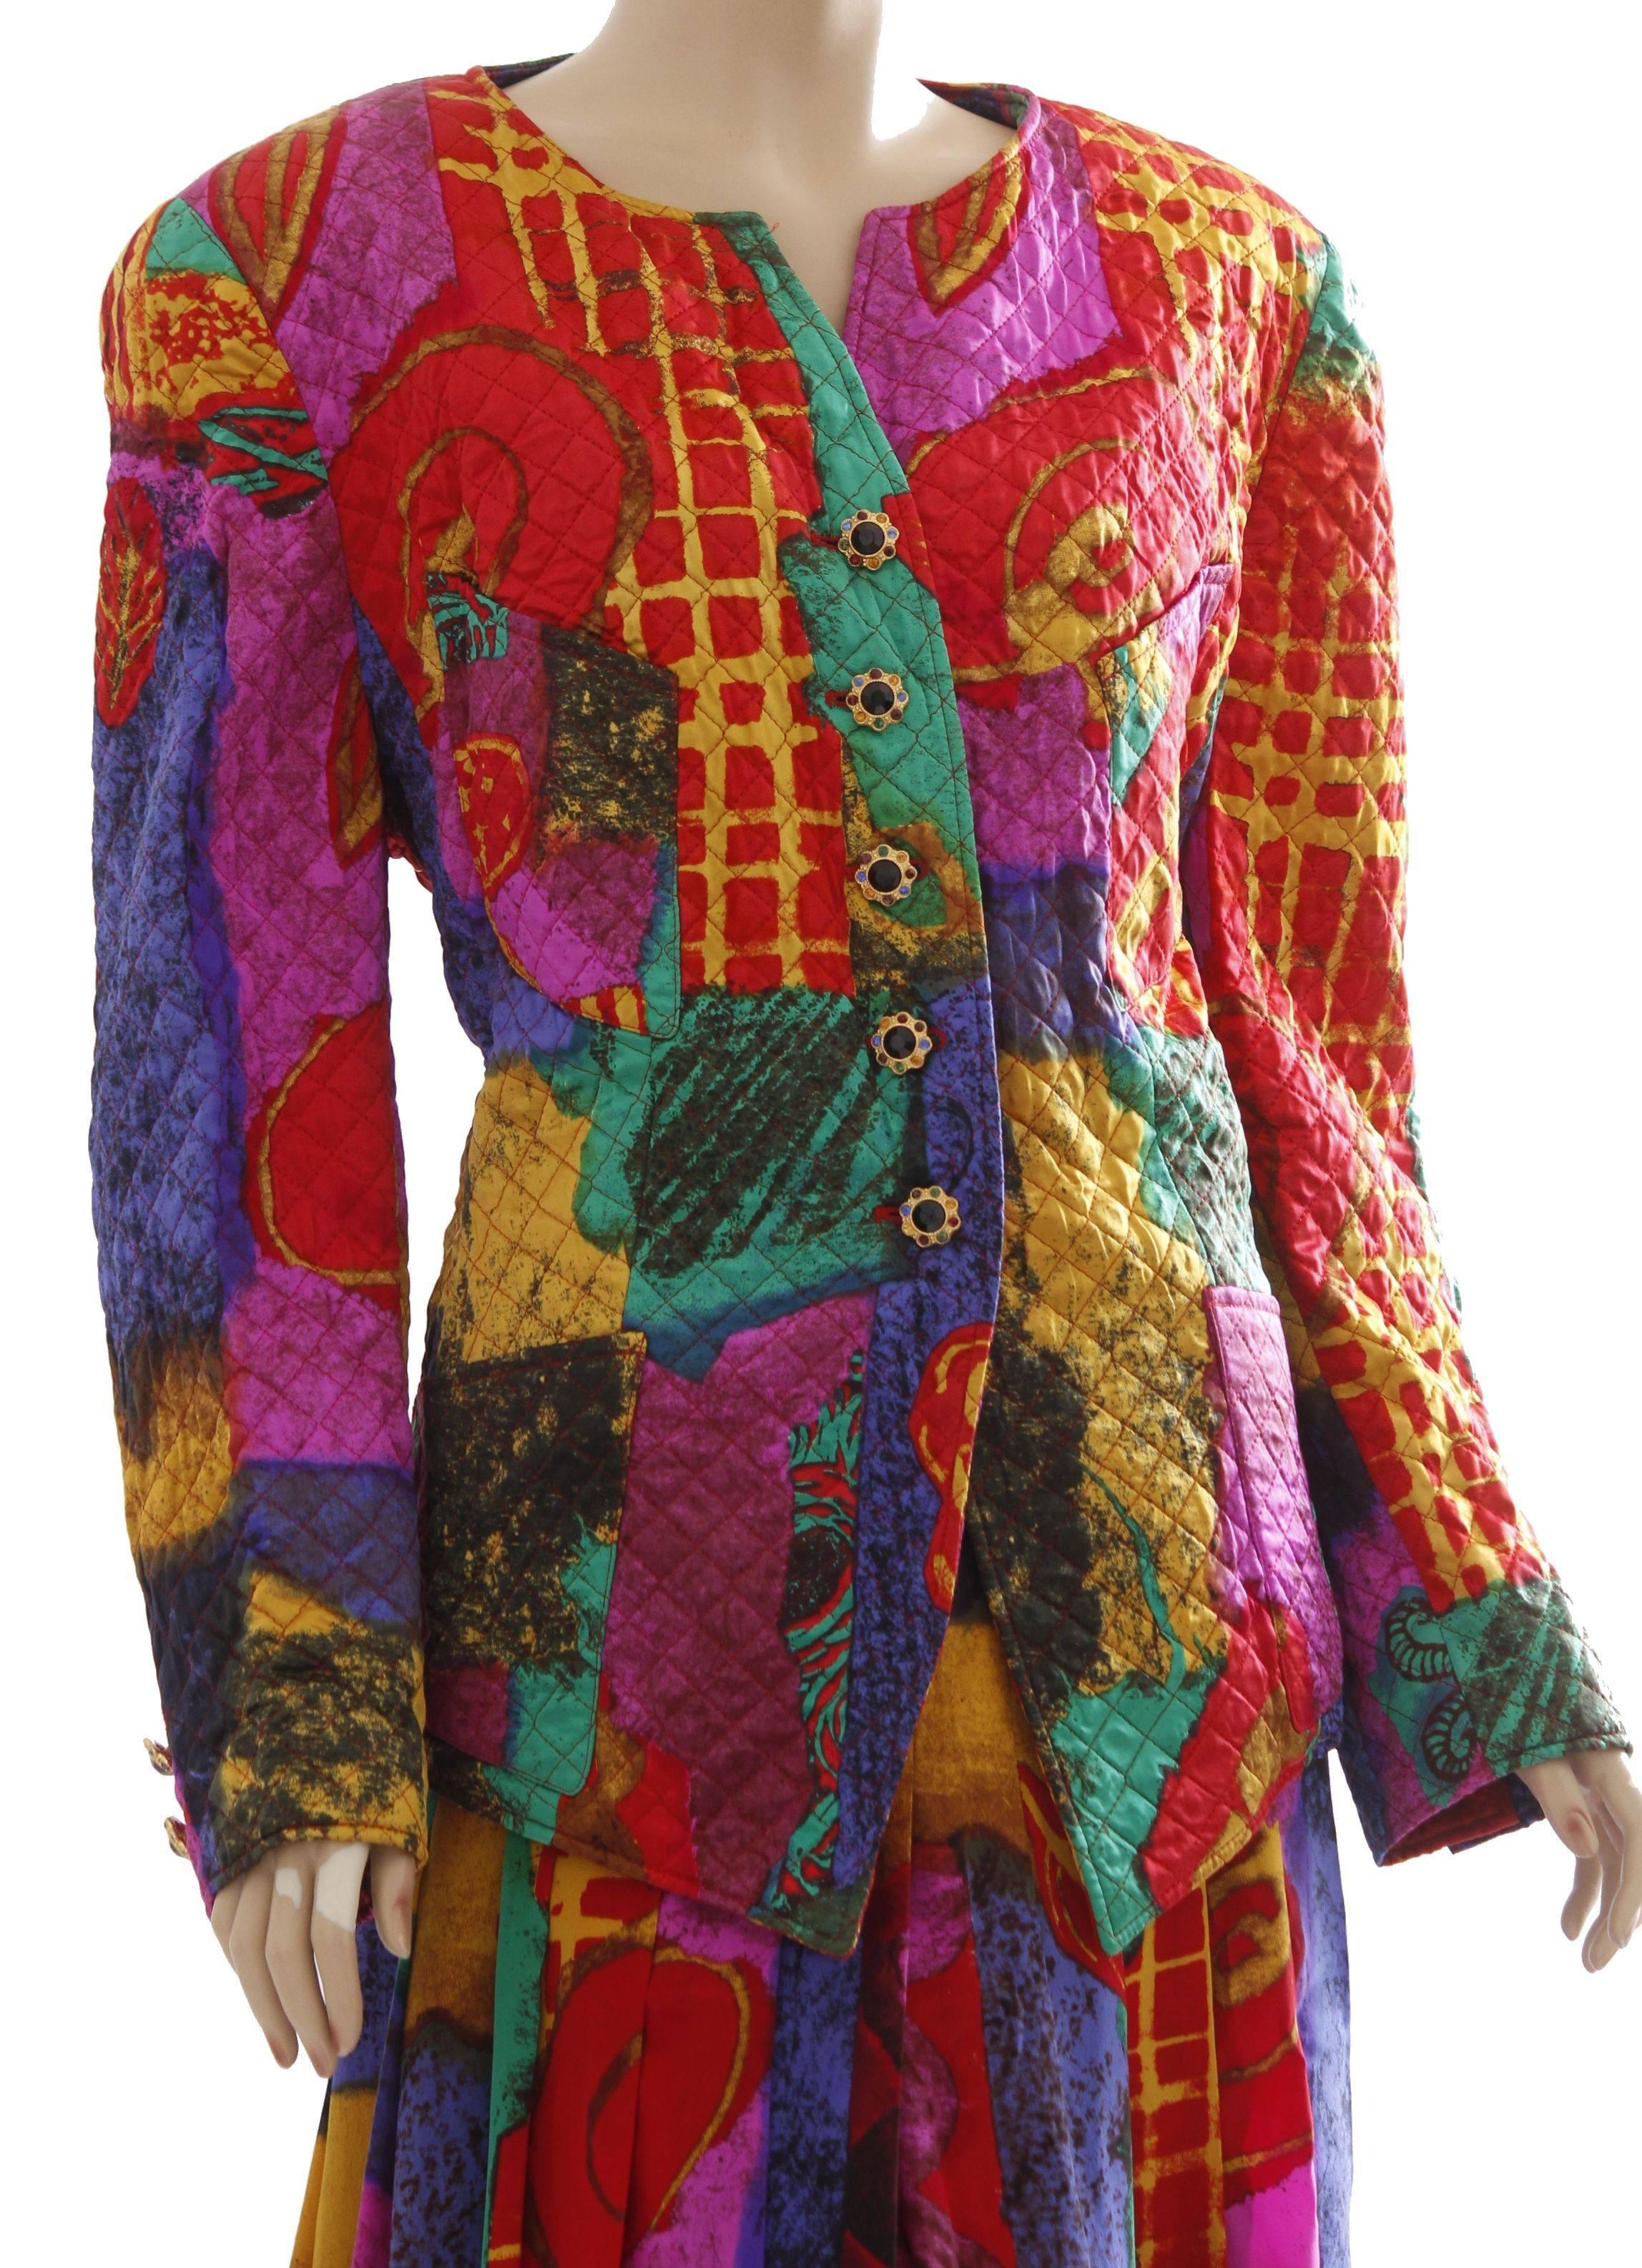 This colorful silk jacket and skirt ensemble was made by Louis Feraud, likely in the 1980s,  Made from a colorful silk print fabric, the jacket features textured quilting and four pockets, and the skirt has box pleats.  In excellent condition with